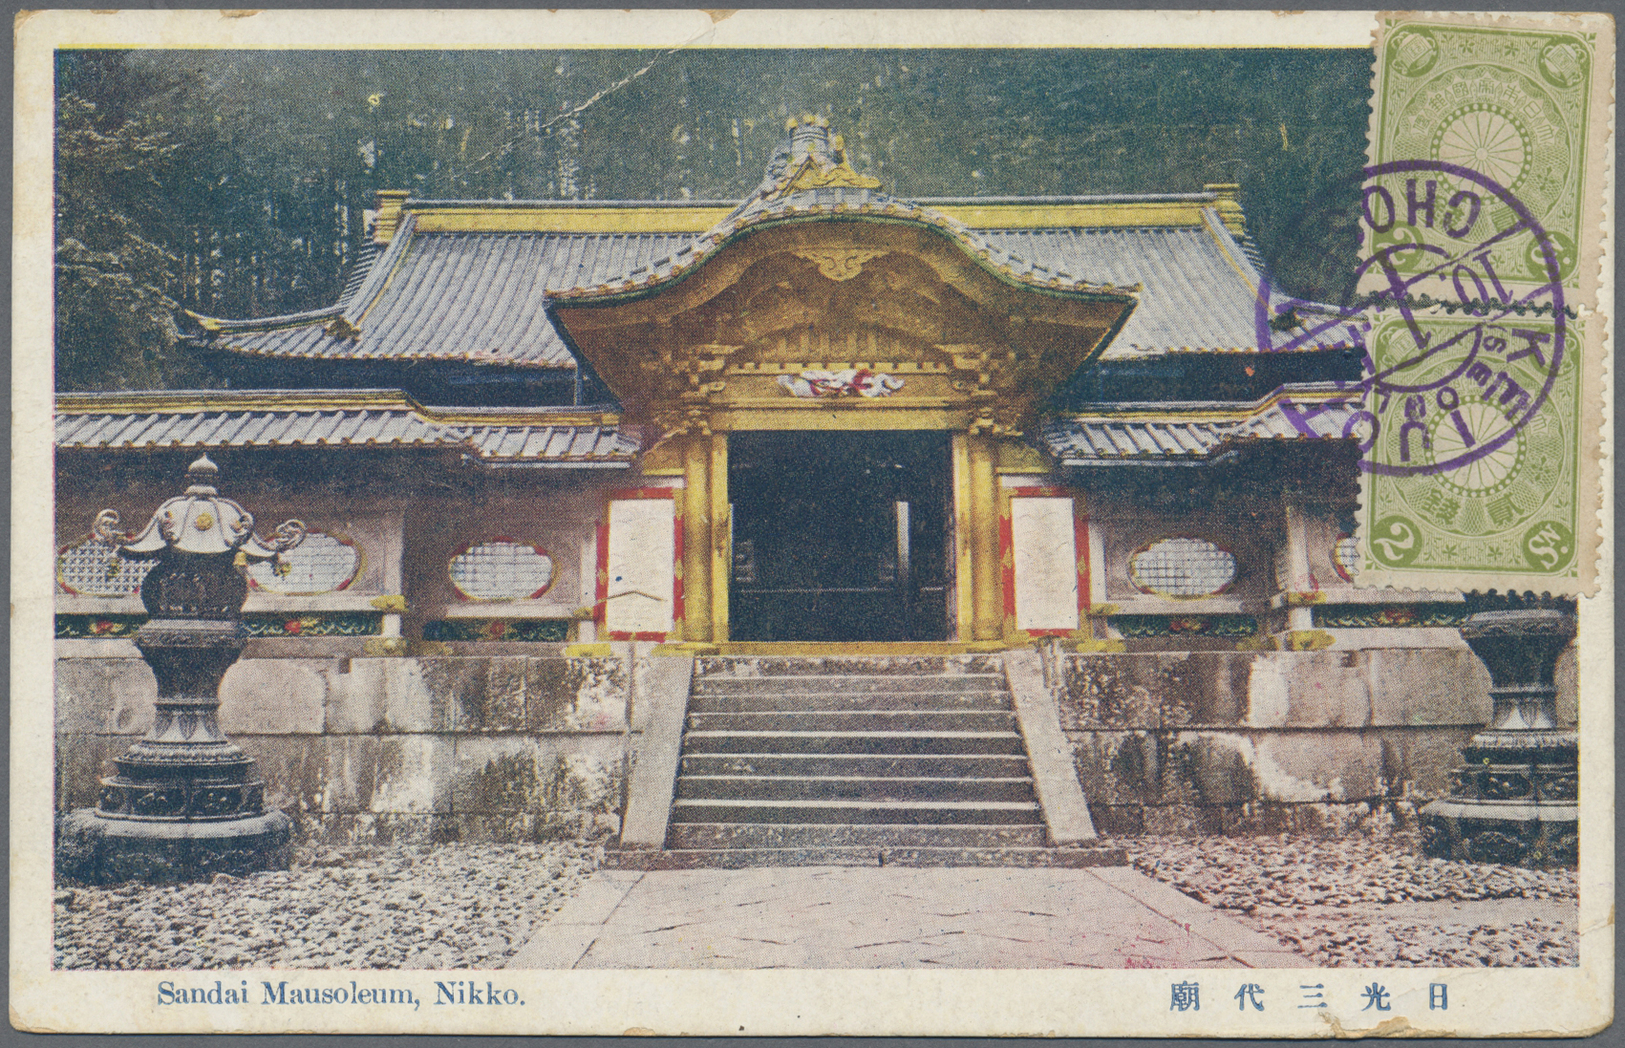 Br Japanische Post In Korea: 1913. Picture Post Card Of The 'Sandai Mausoleum' Addressed To Holland Bearing Japan Yvert - Franchise Militaire